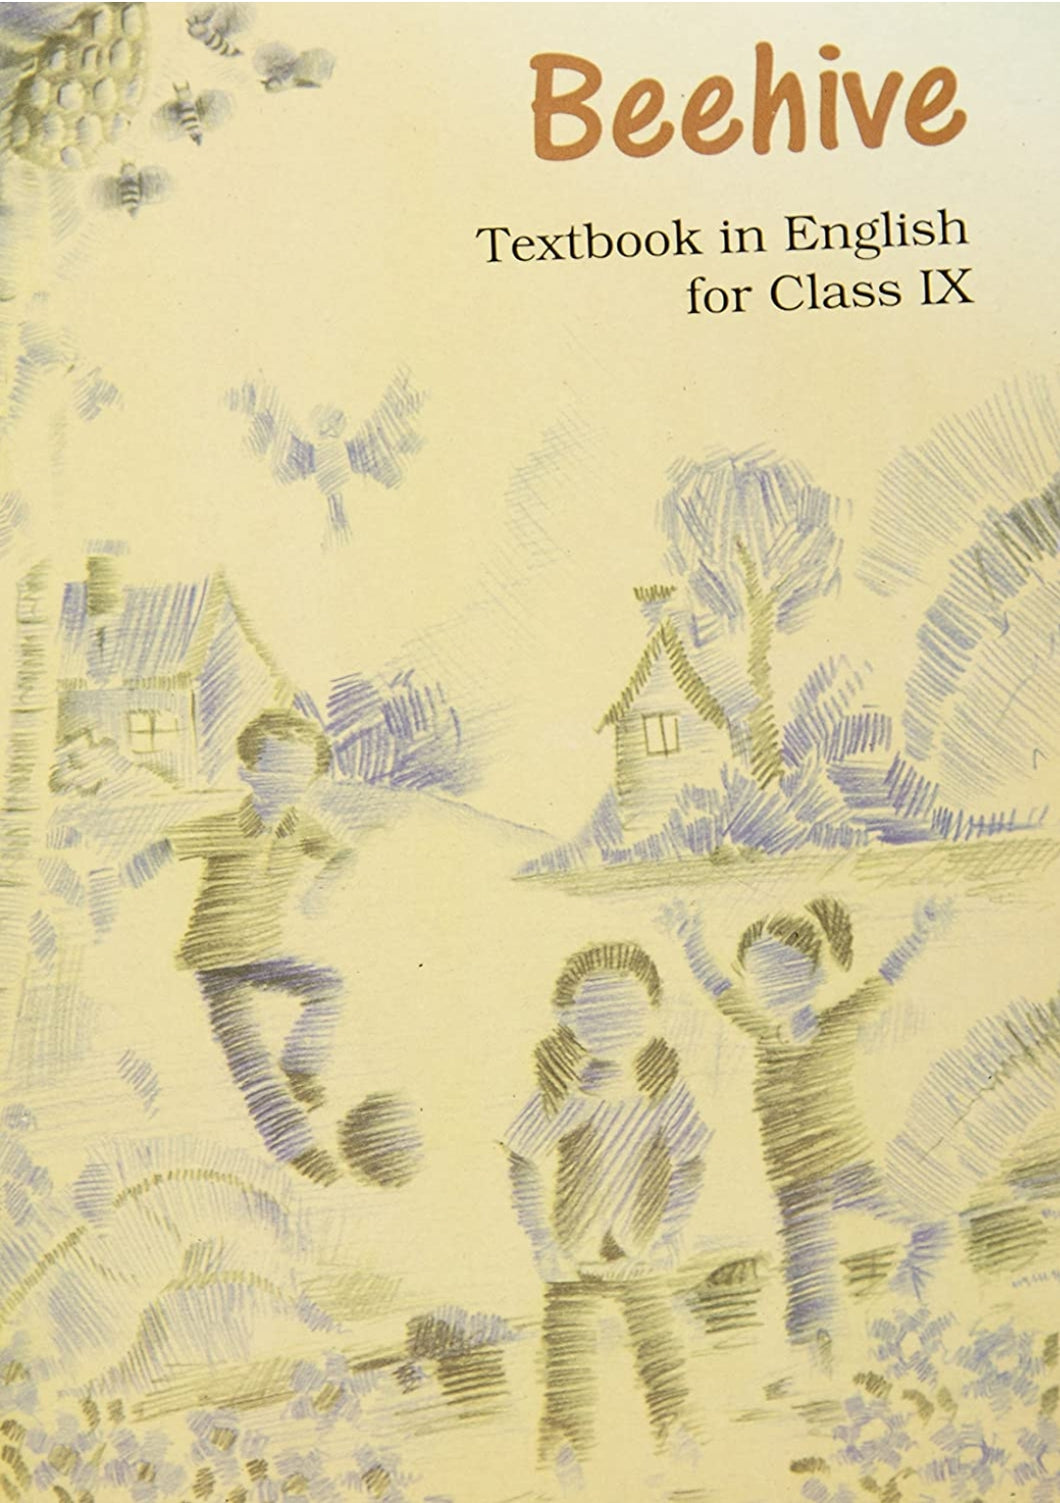 NCERT Beehive - English Textbook for Class 9 - latest edition as per NCERT/CBSE - Booksfy